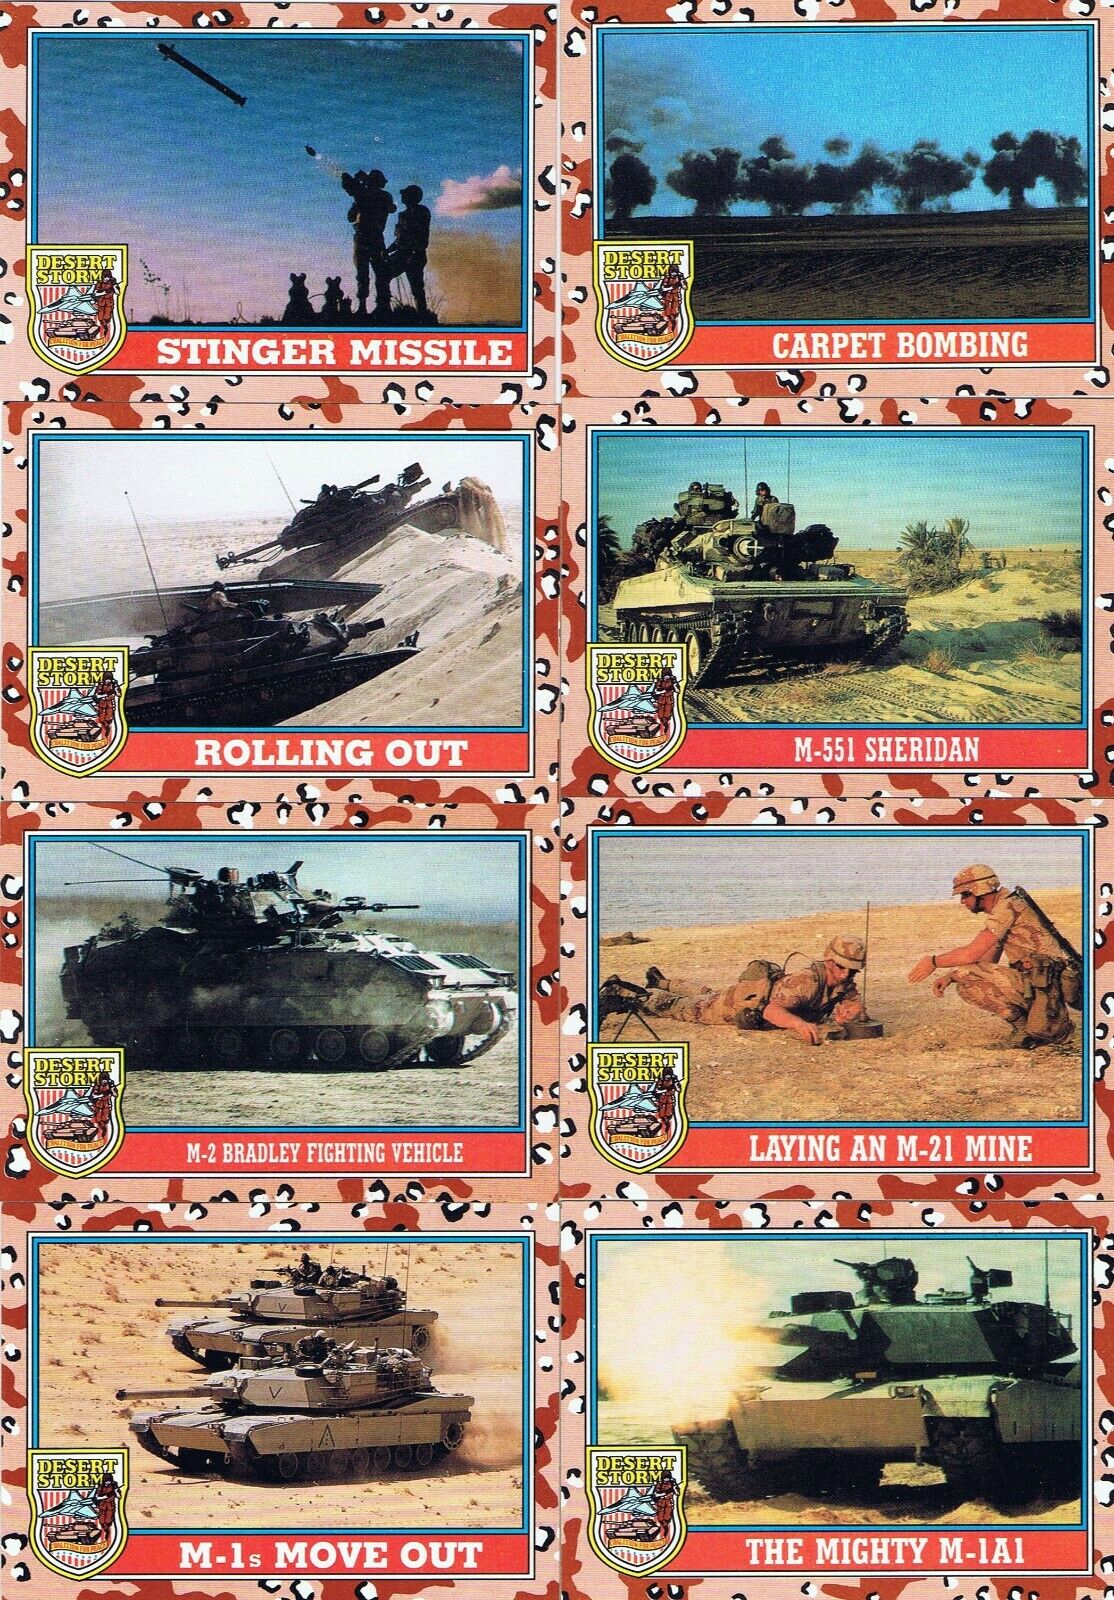 Desert Storm Victory (Series 2) Topps 1991 SINGLES $1each + Discounts+Stickers.